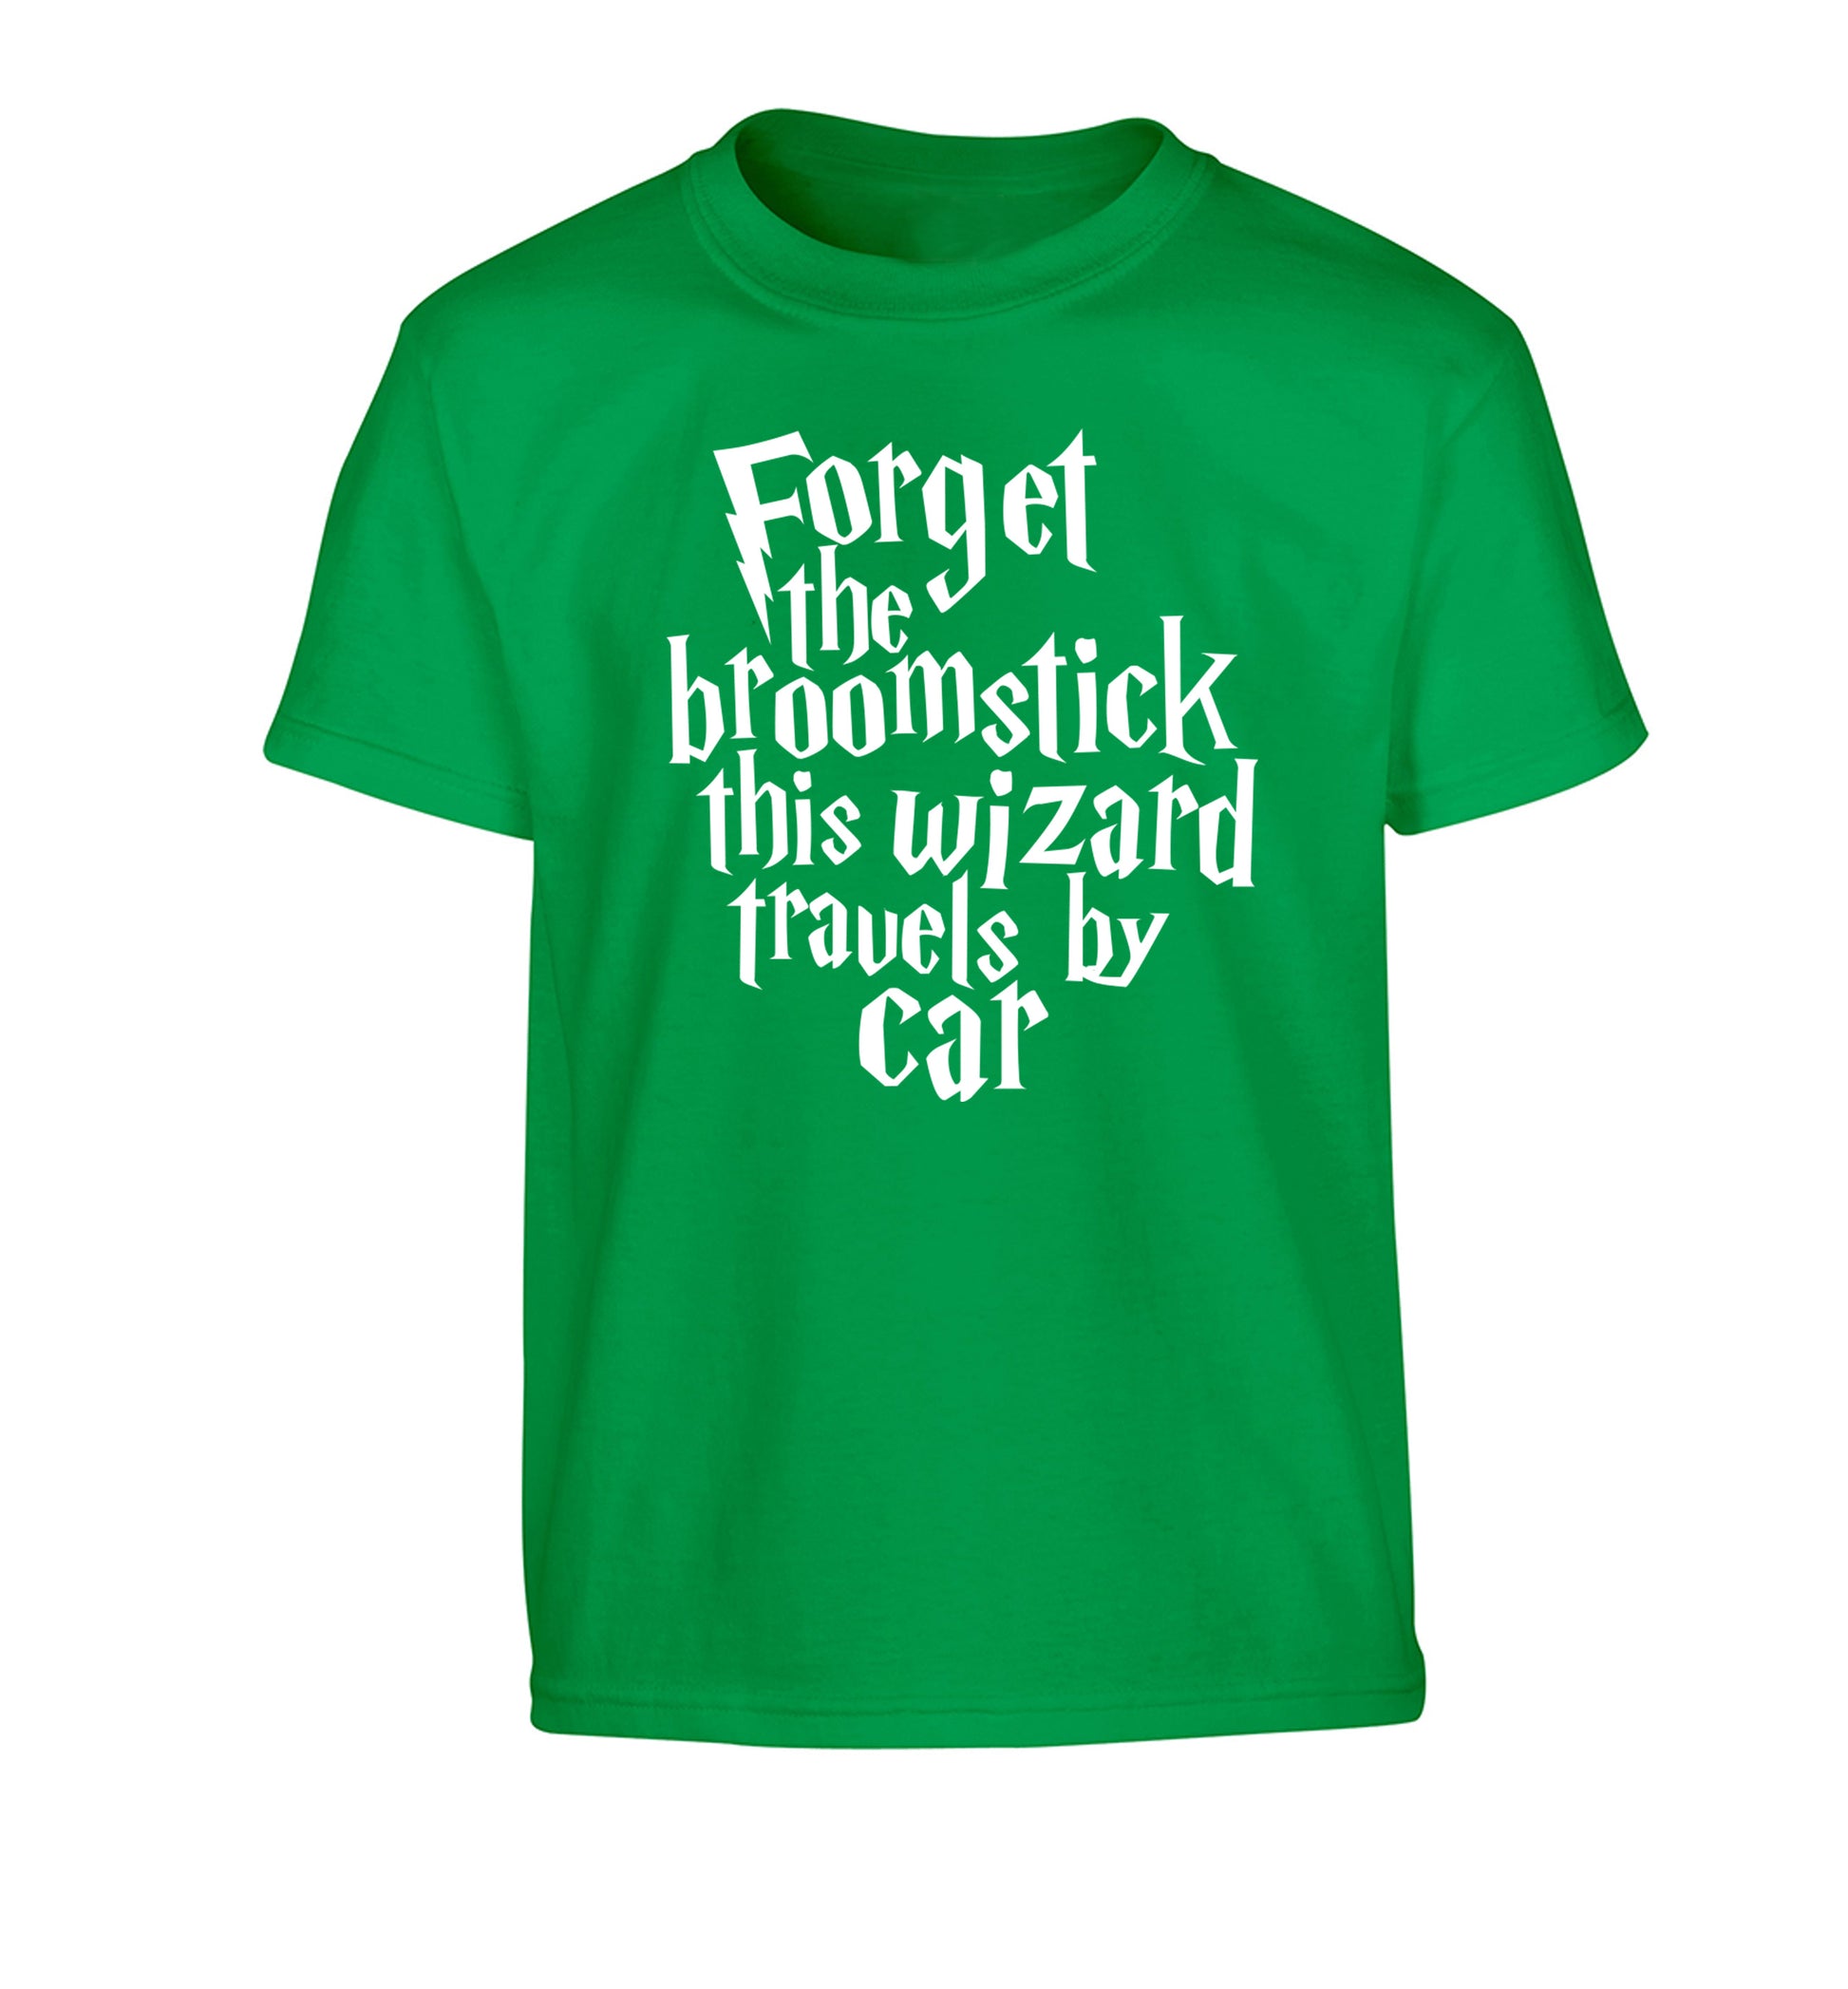 Forget the broomstick this wizard travels by car Children's green Tshirt 12-14 Years